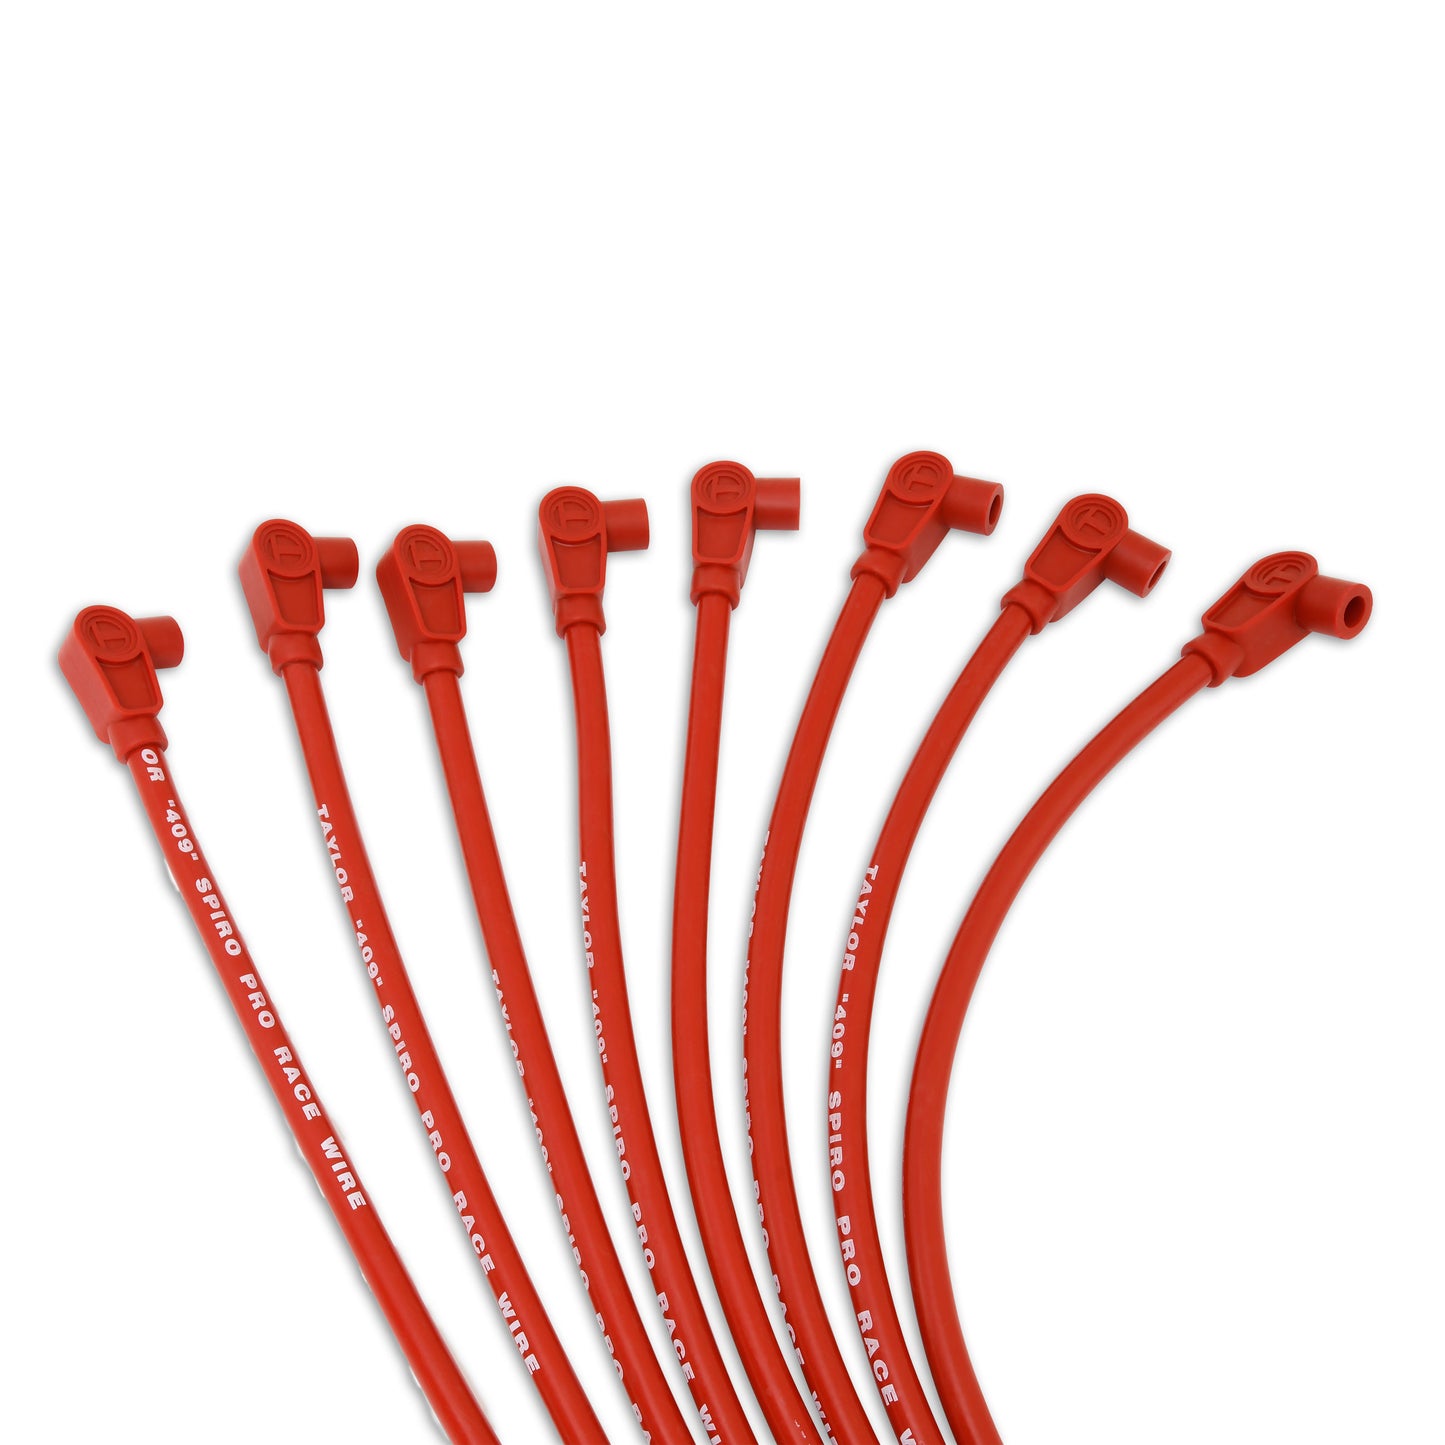 Taylor Cable 79228 10.4mm 409 Spiro Pro Race Fit Spark Plug Wires 90° Red